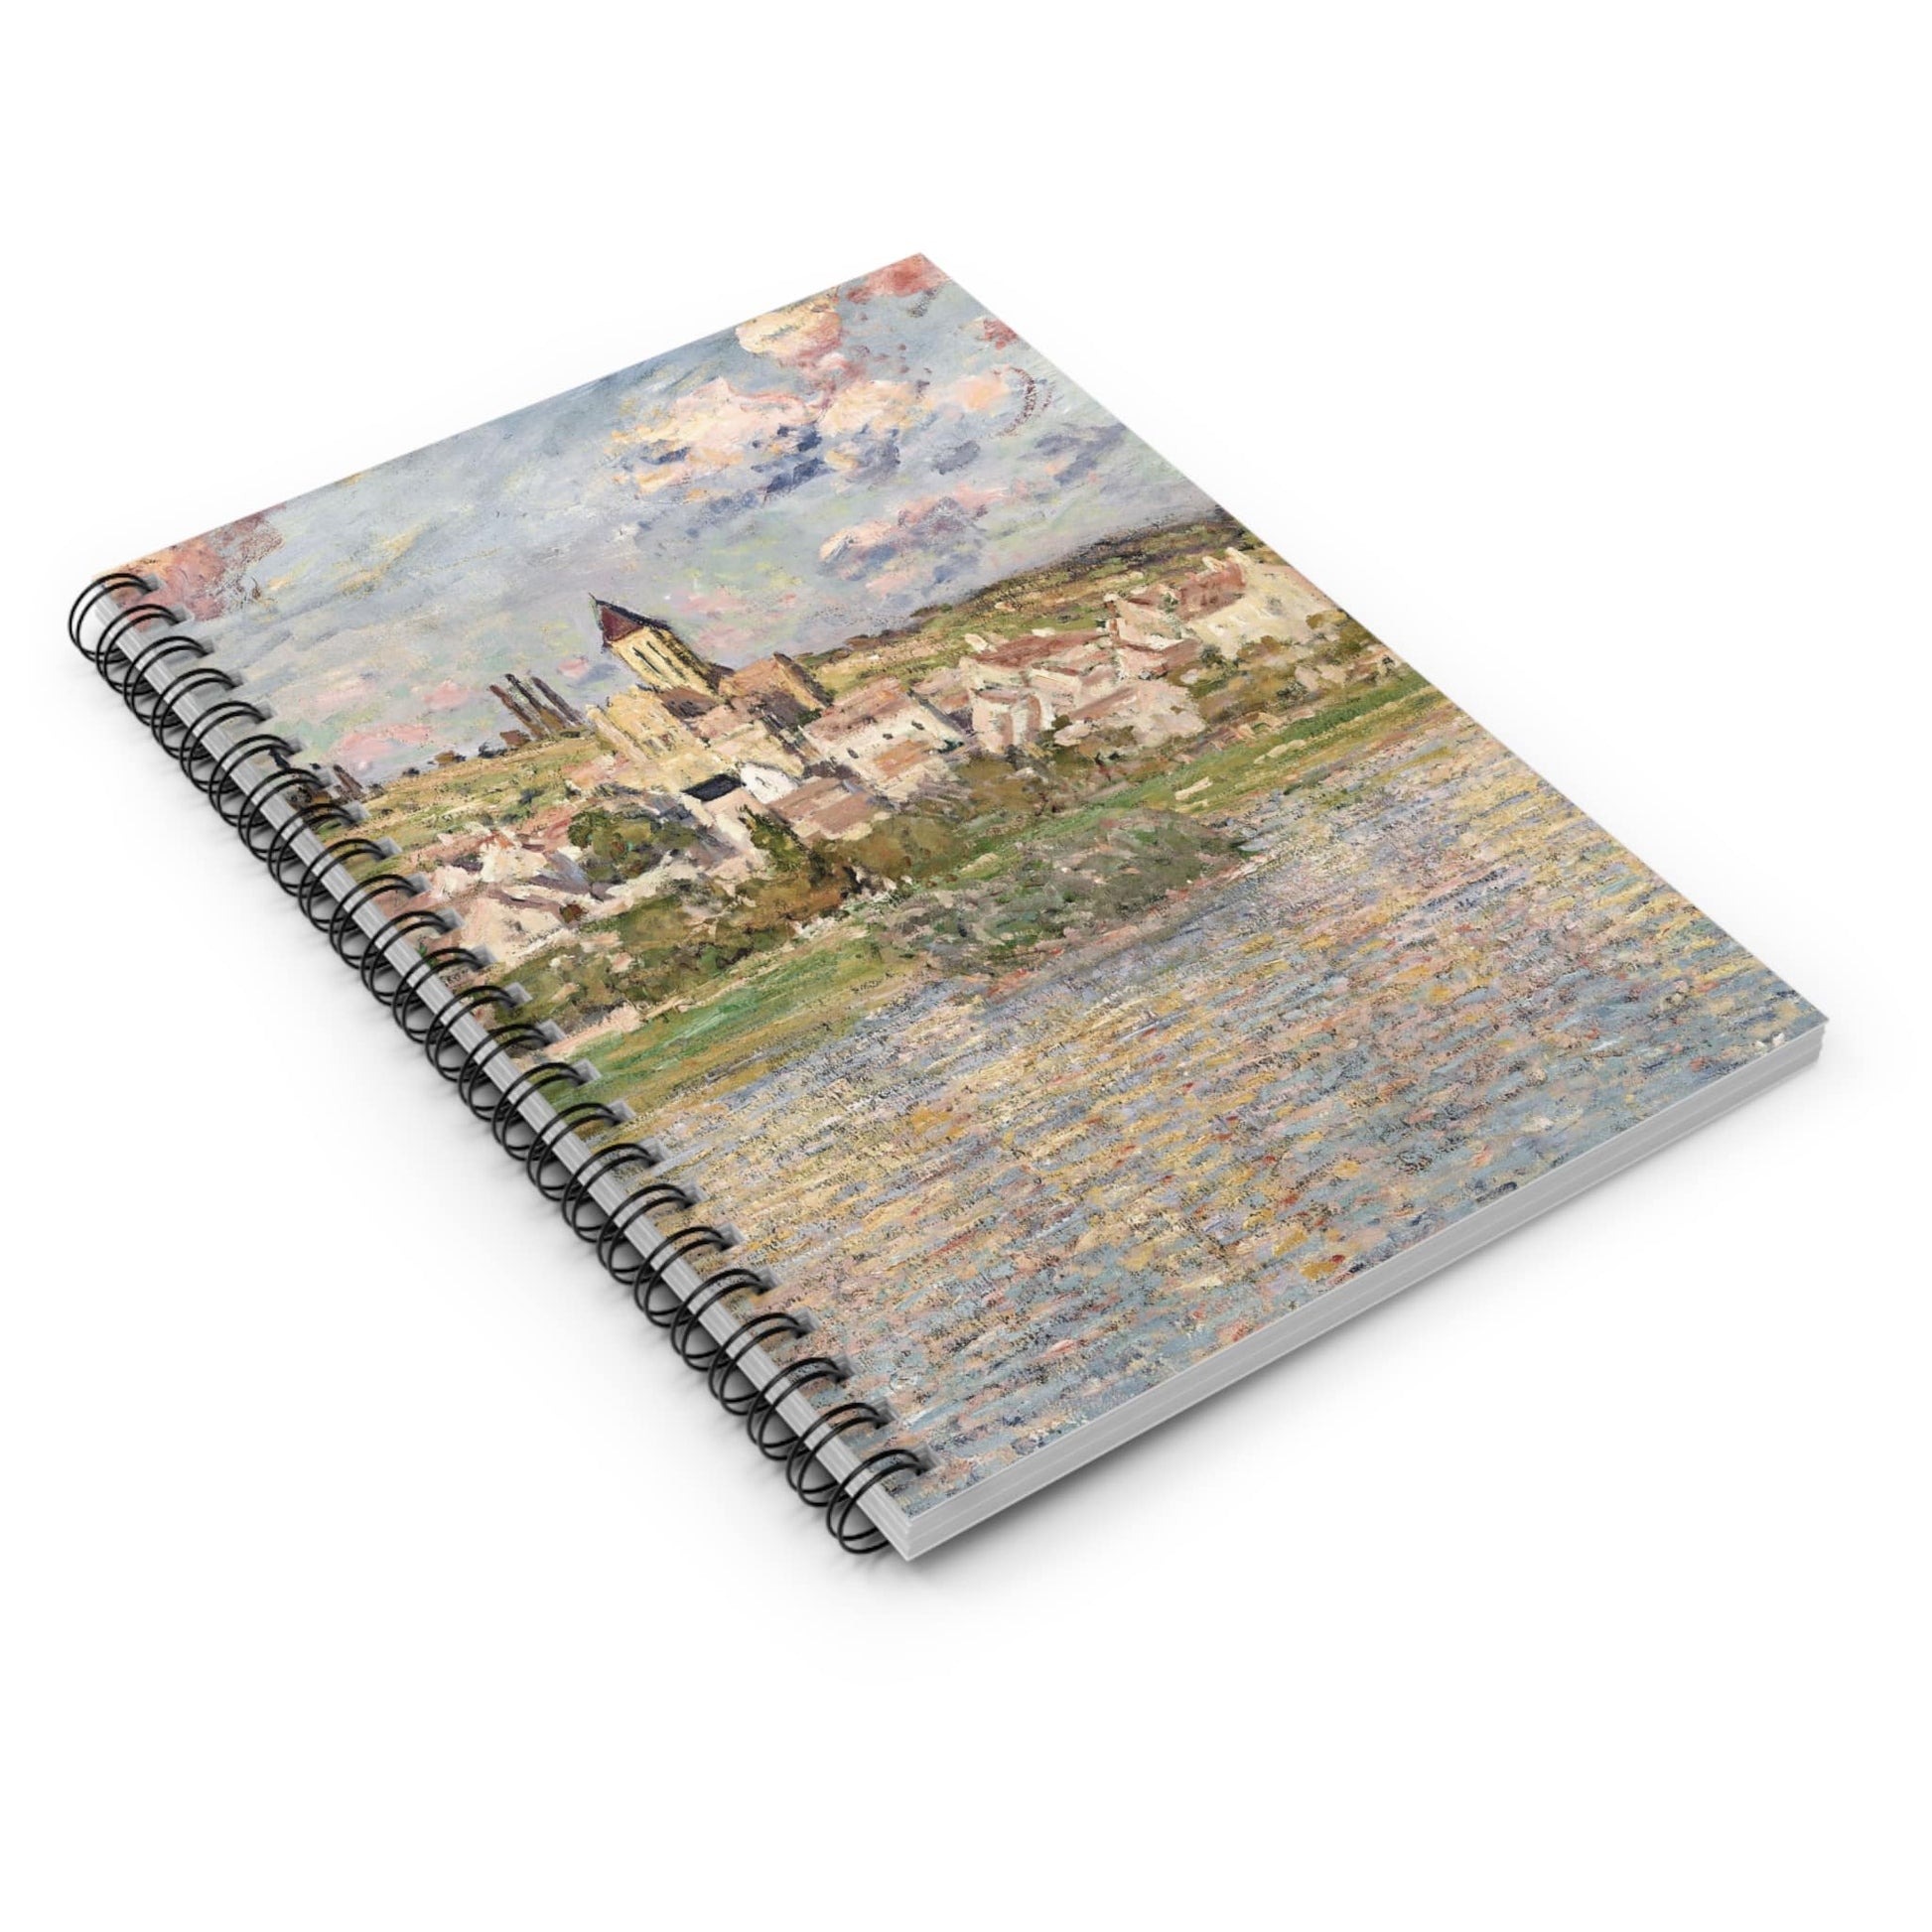 Paris Landscape Spiral Notebook Laying Flat on White Surface